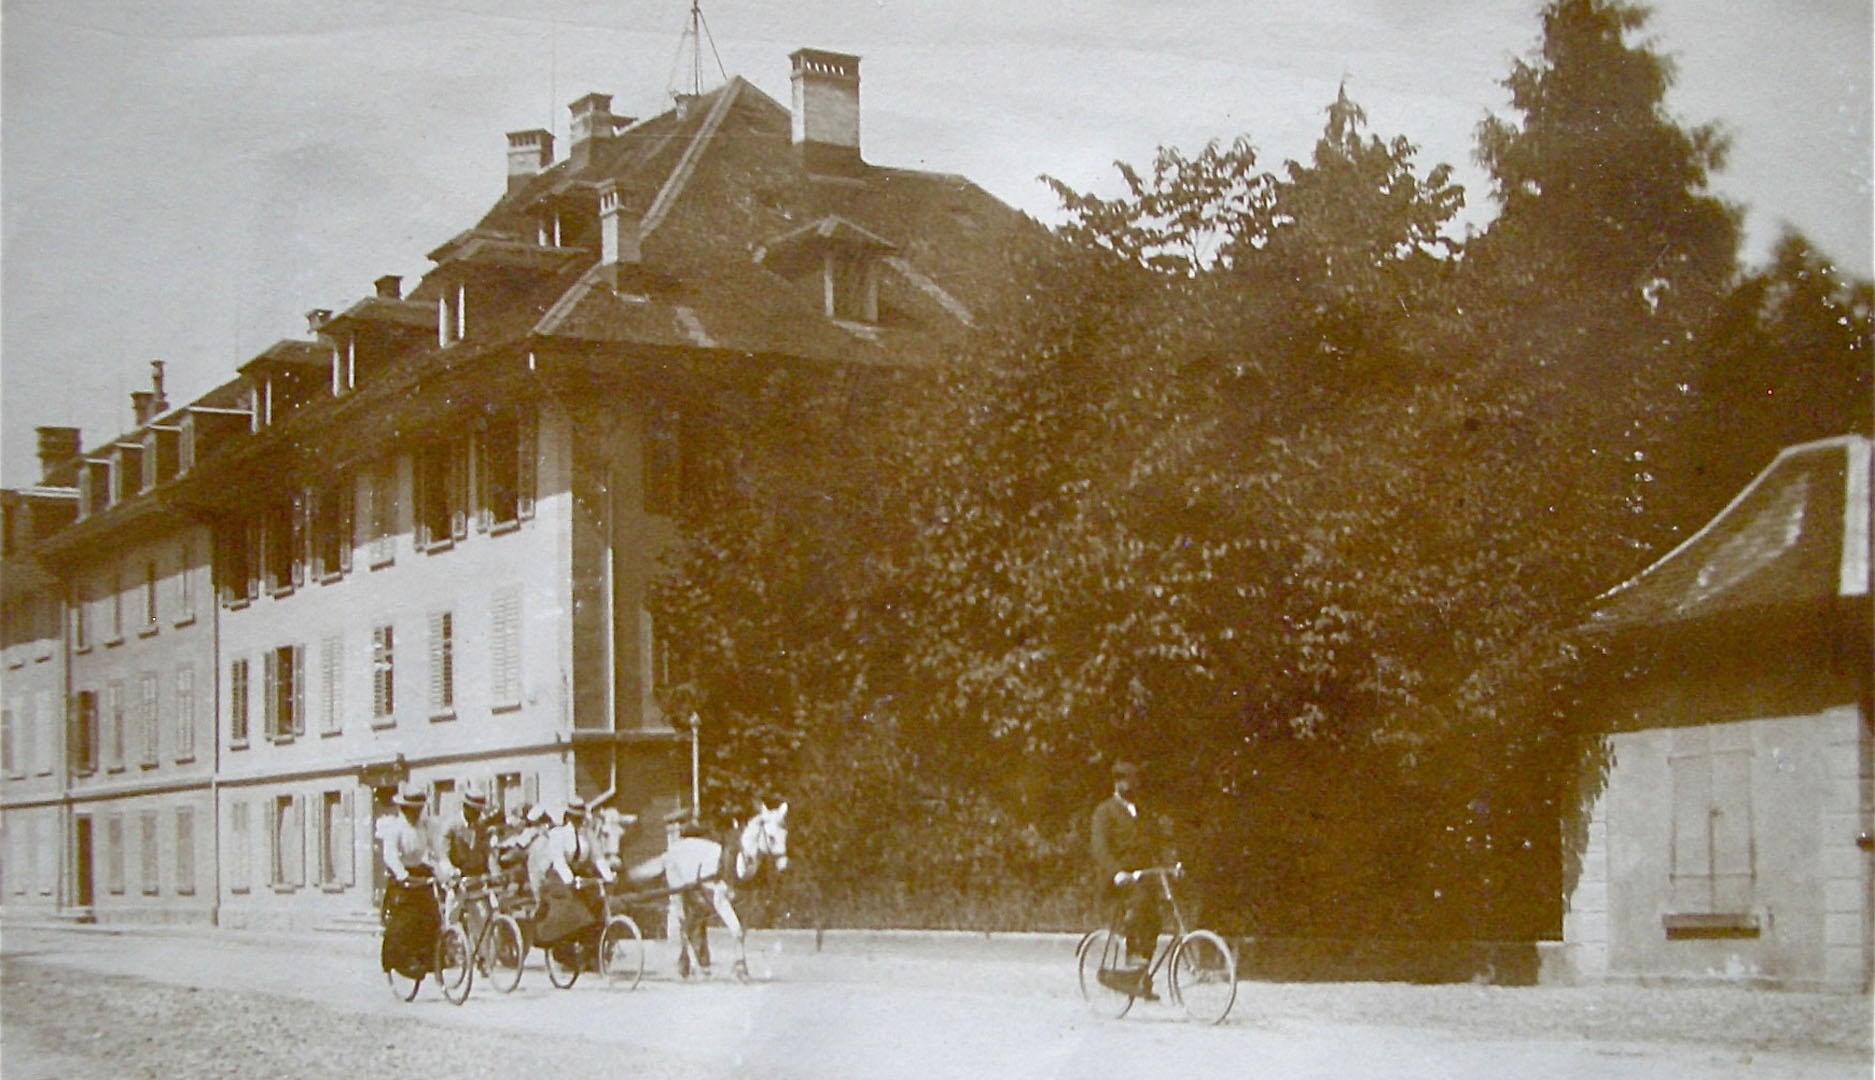 House of the Hunziker in 1910